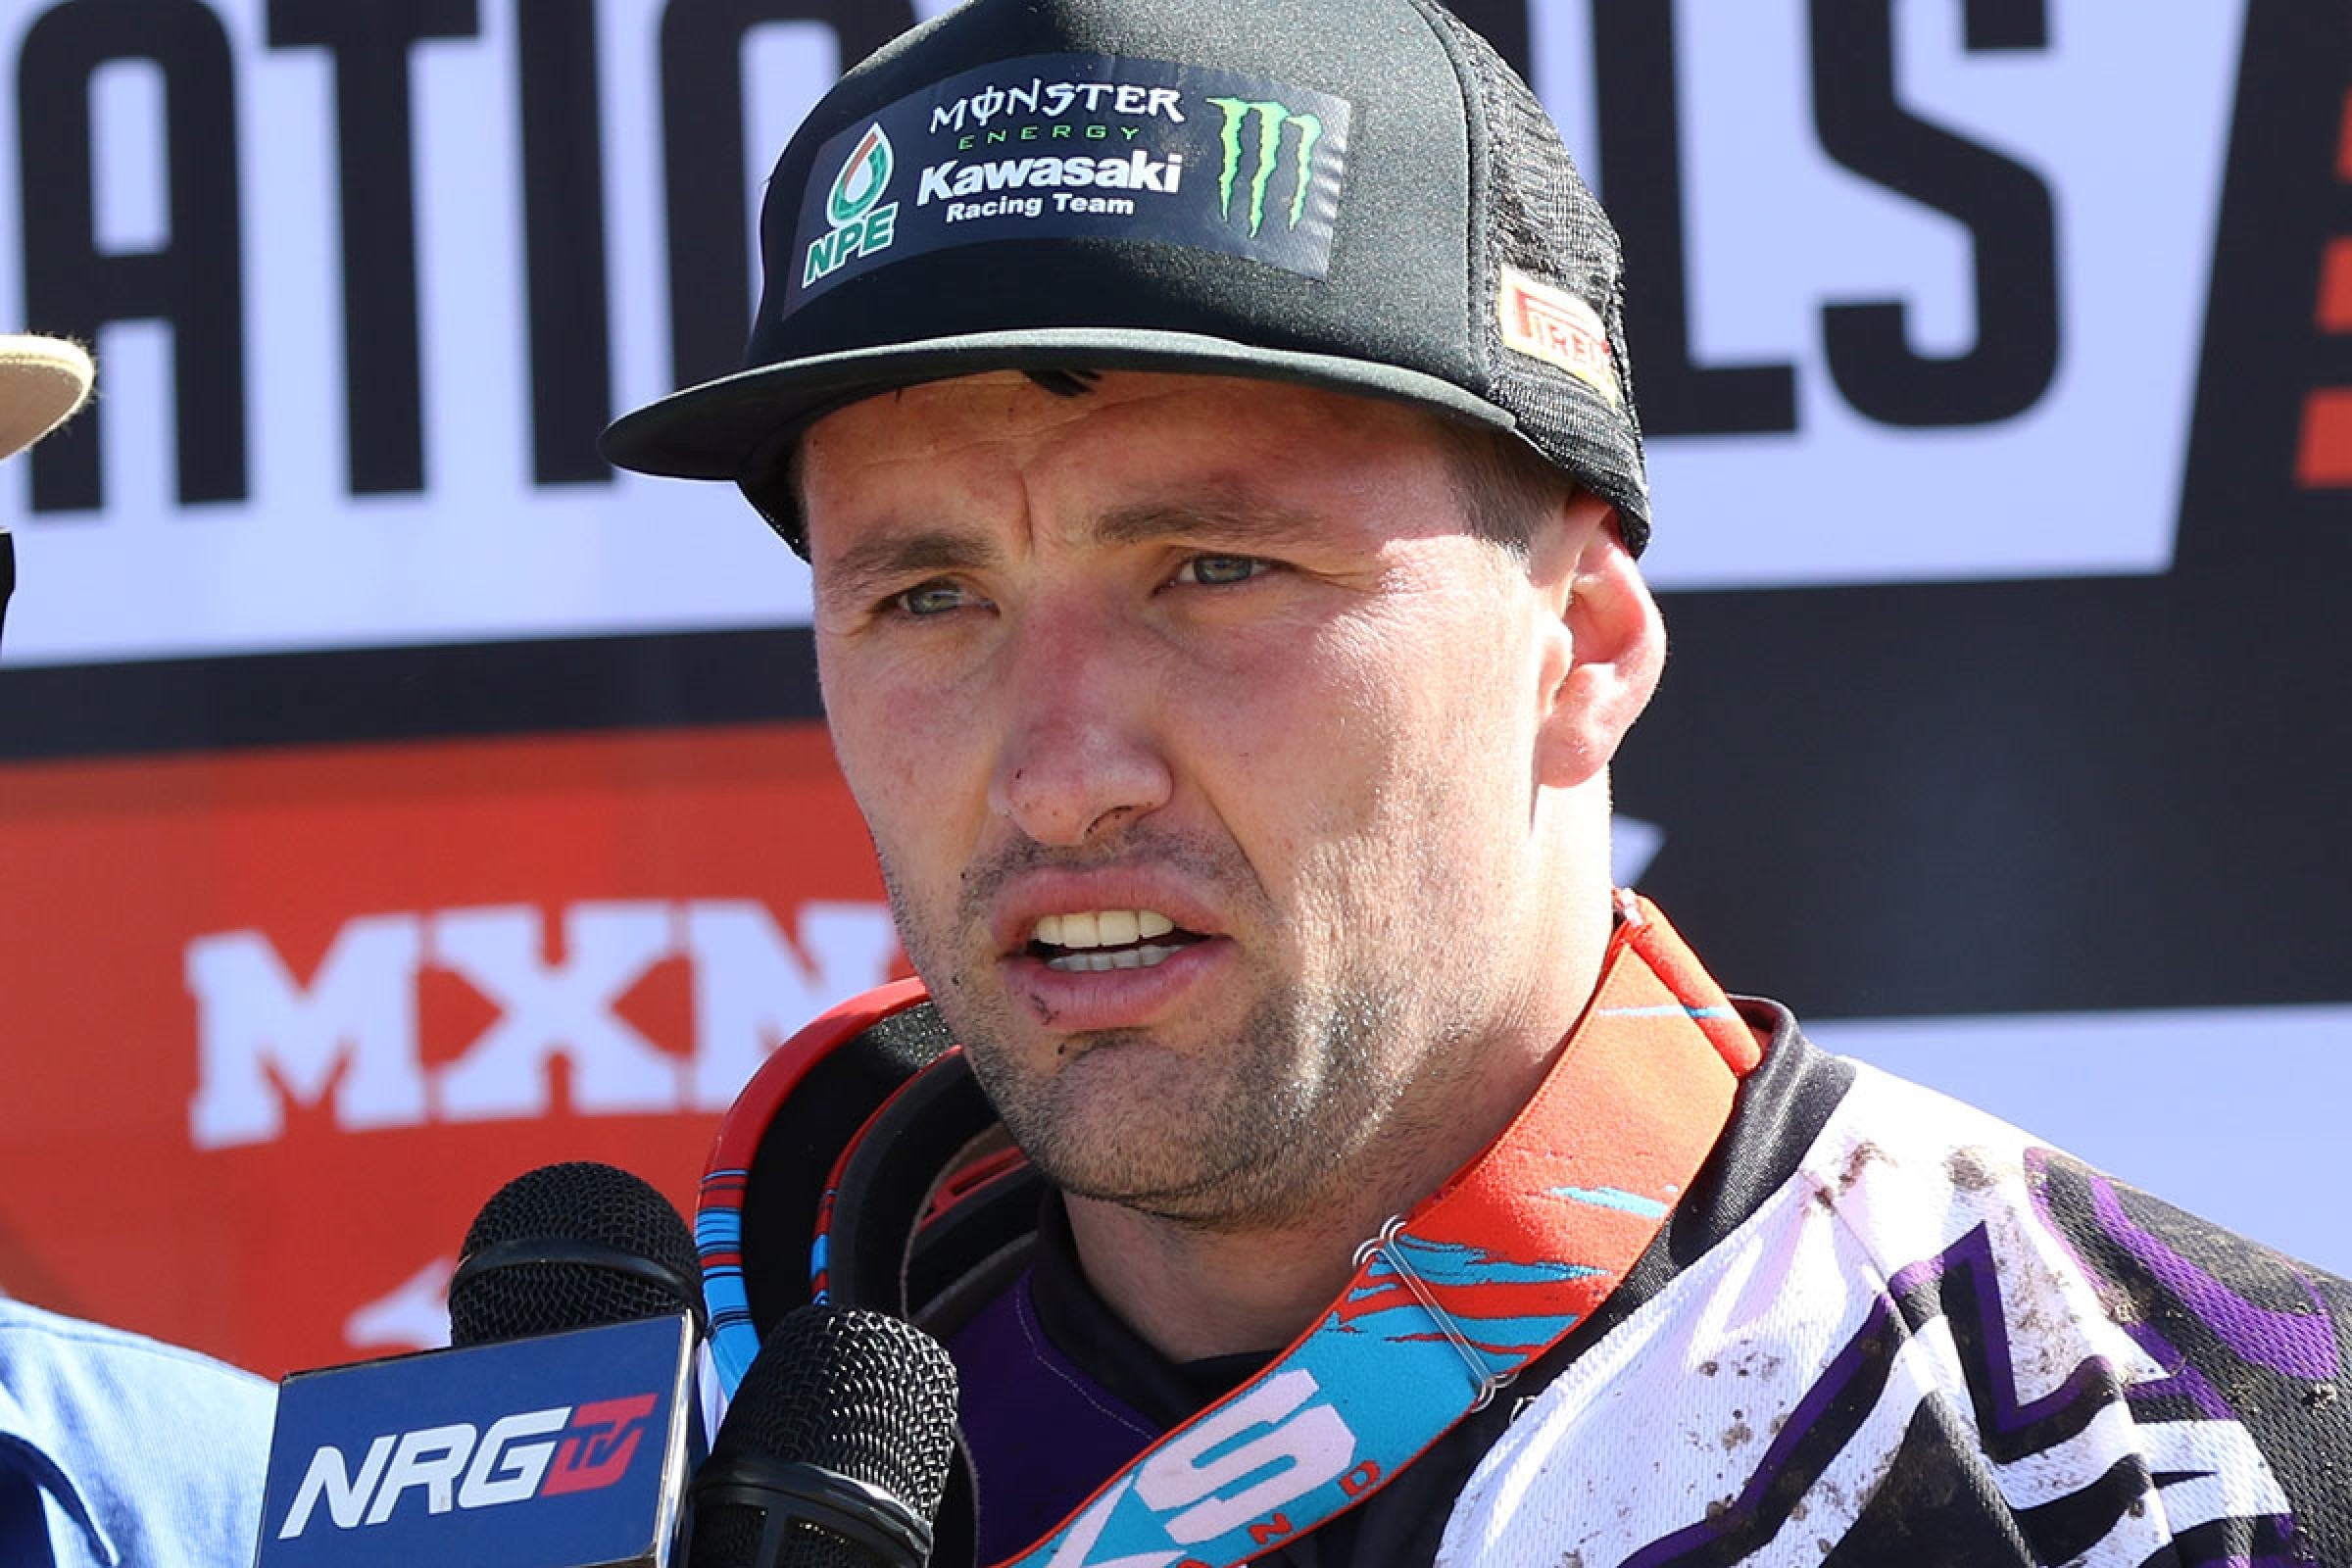 MA Imposes Four-Year Ban on Jake Moss for Positive Drug Test - Racer X